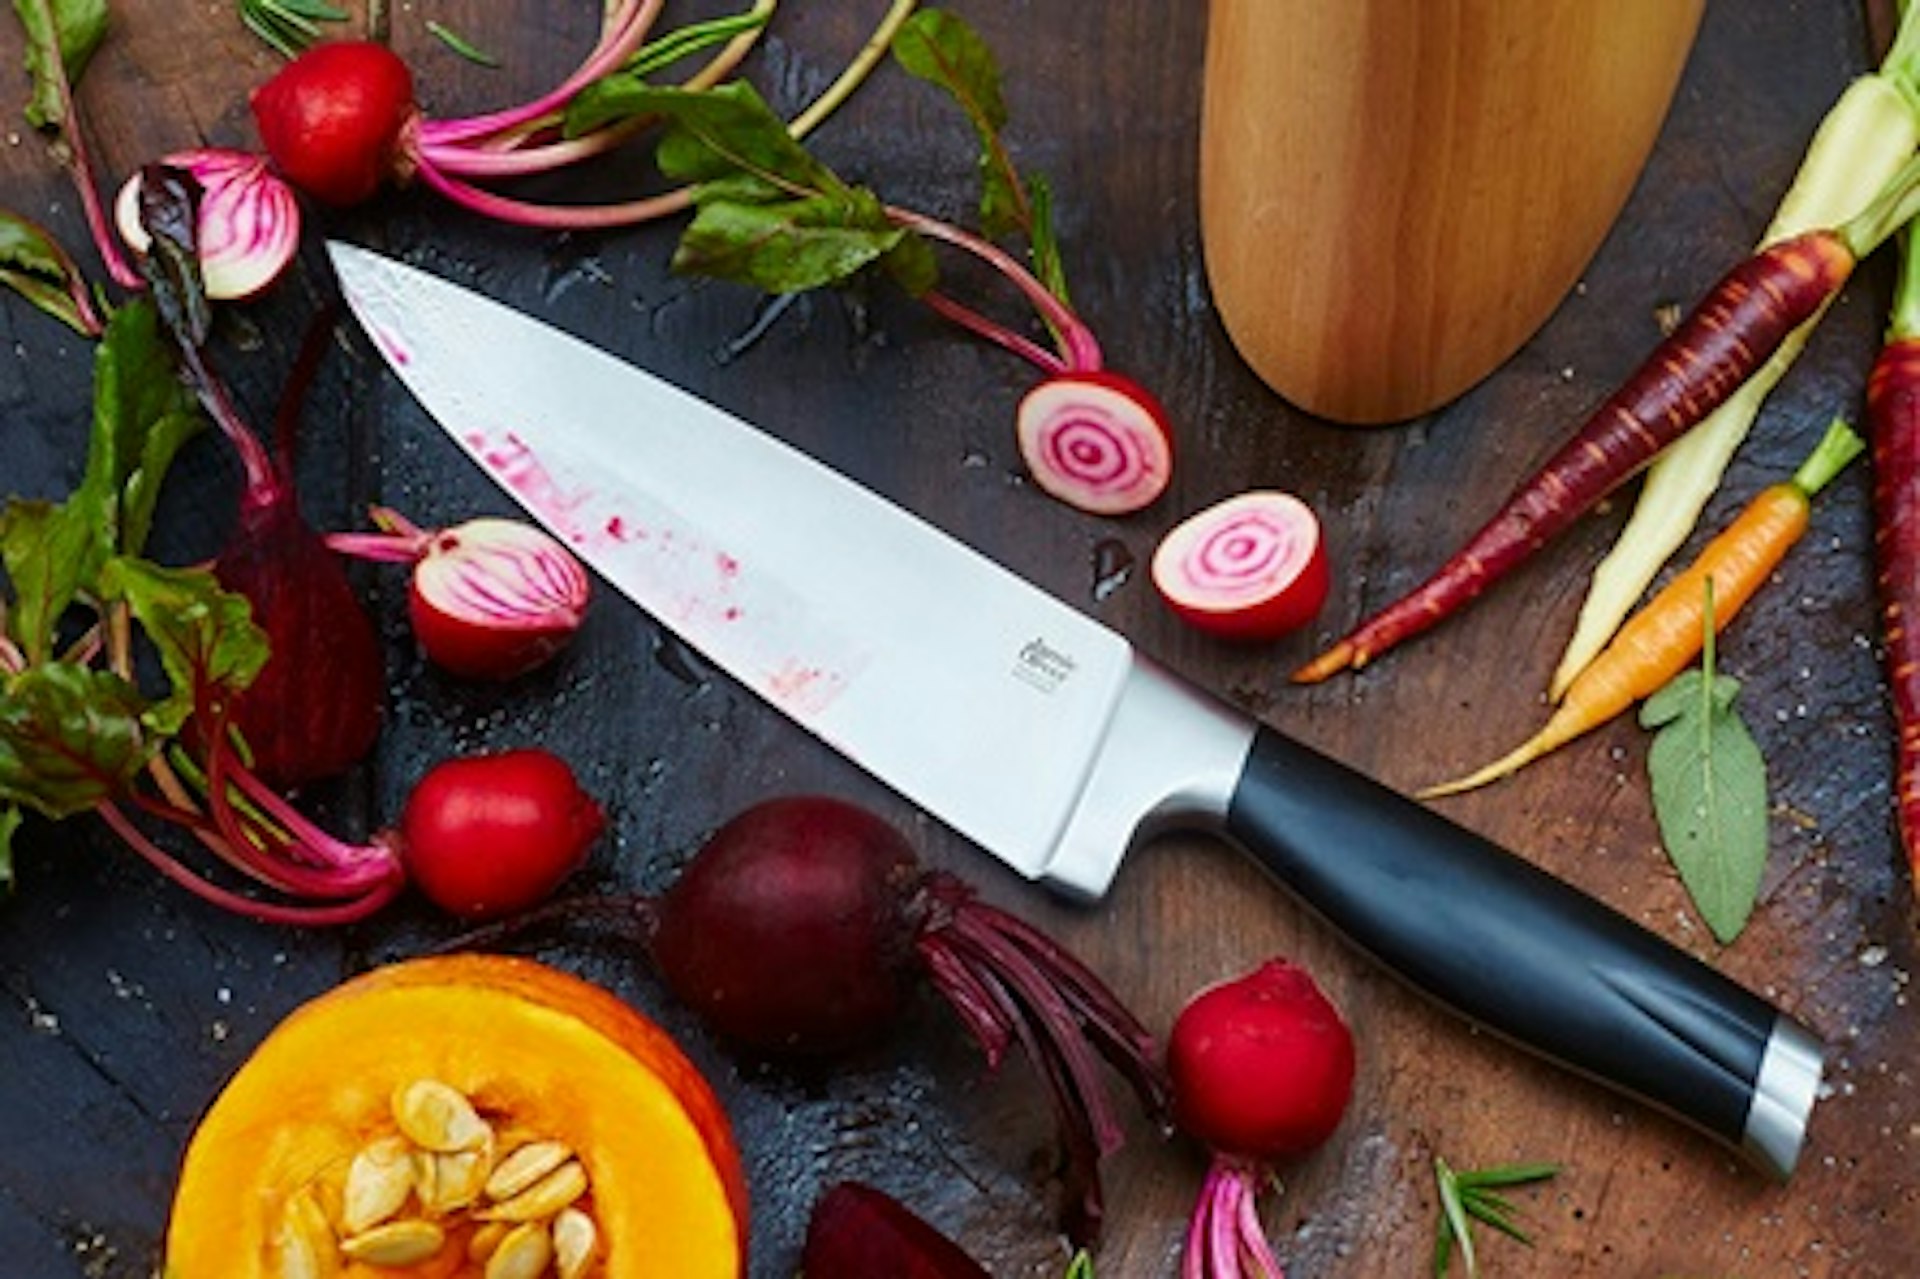 Sharpen Your Knife Skills: The Essentials Class at The Jamie Oliver Cookery School